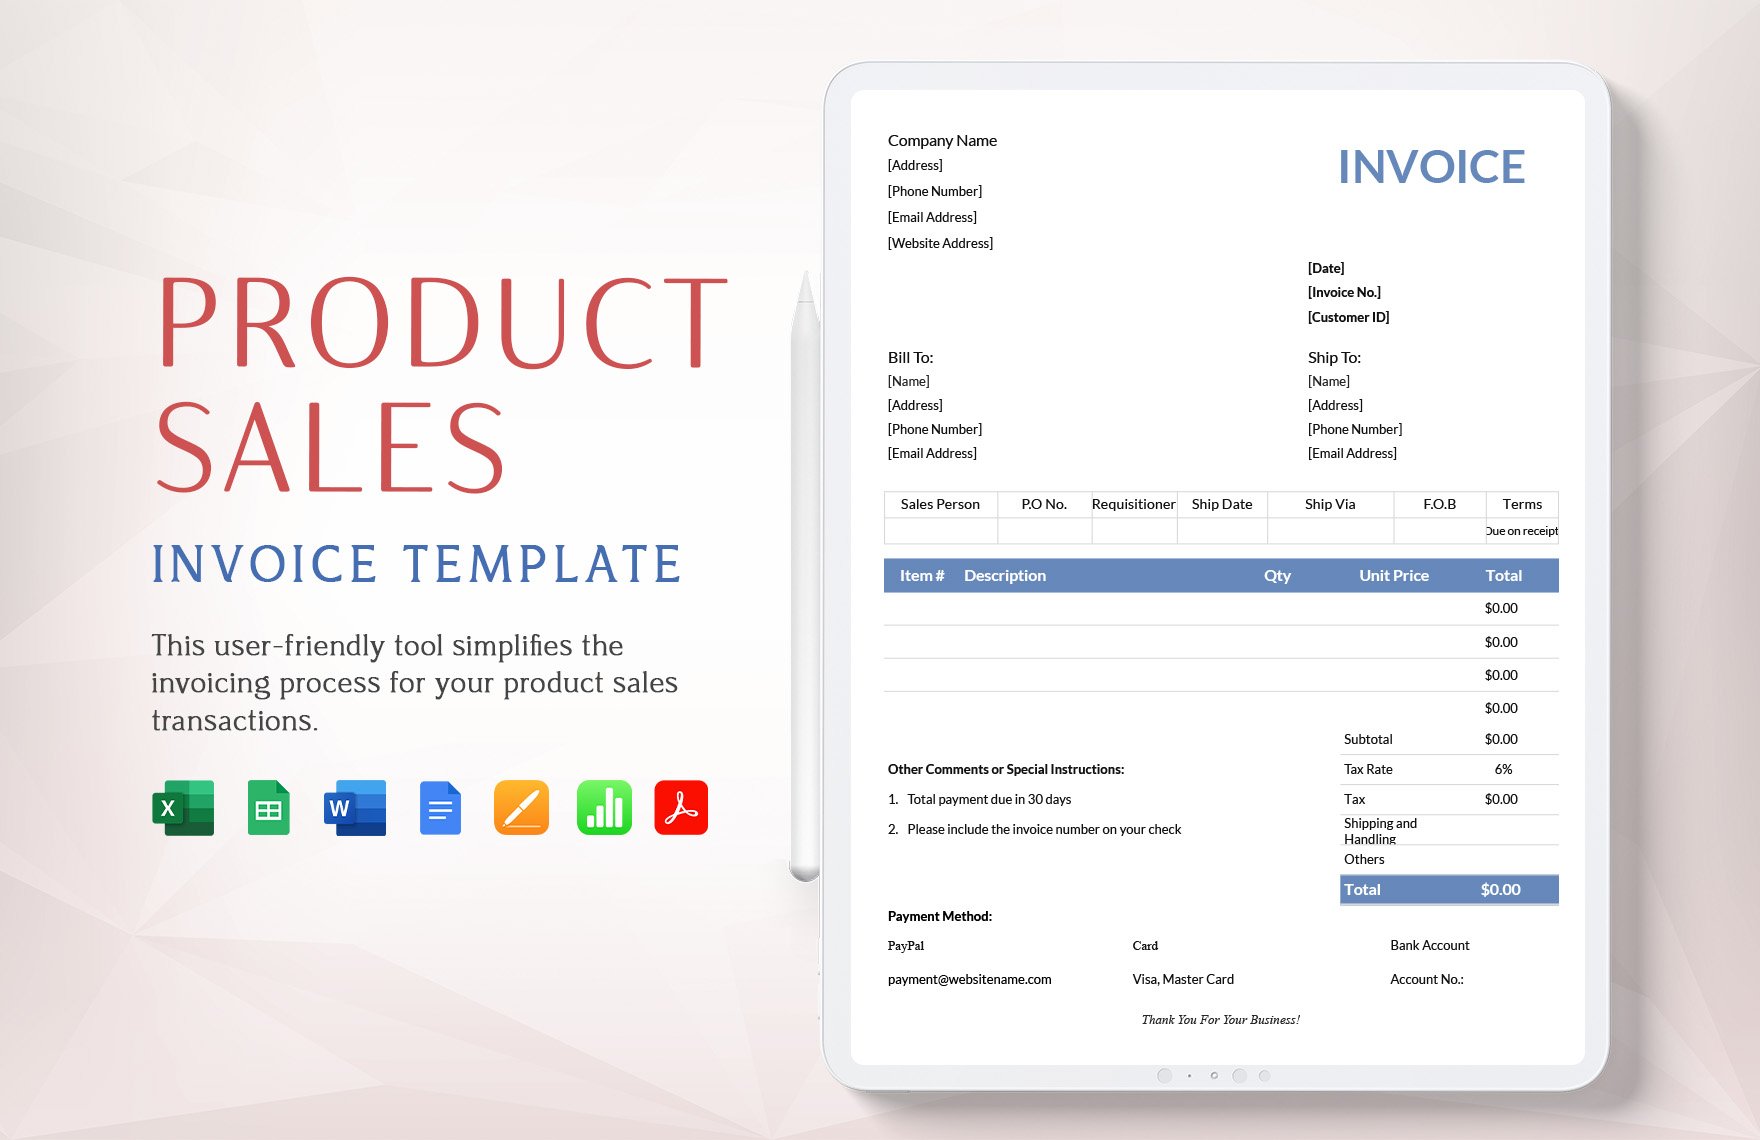 Product Sales Invoice Template in Word, Google Docs, Excel, PDF, Google Sheets, Apple Pages, Apple Numbers